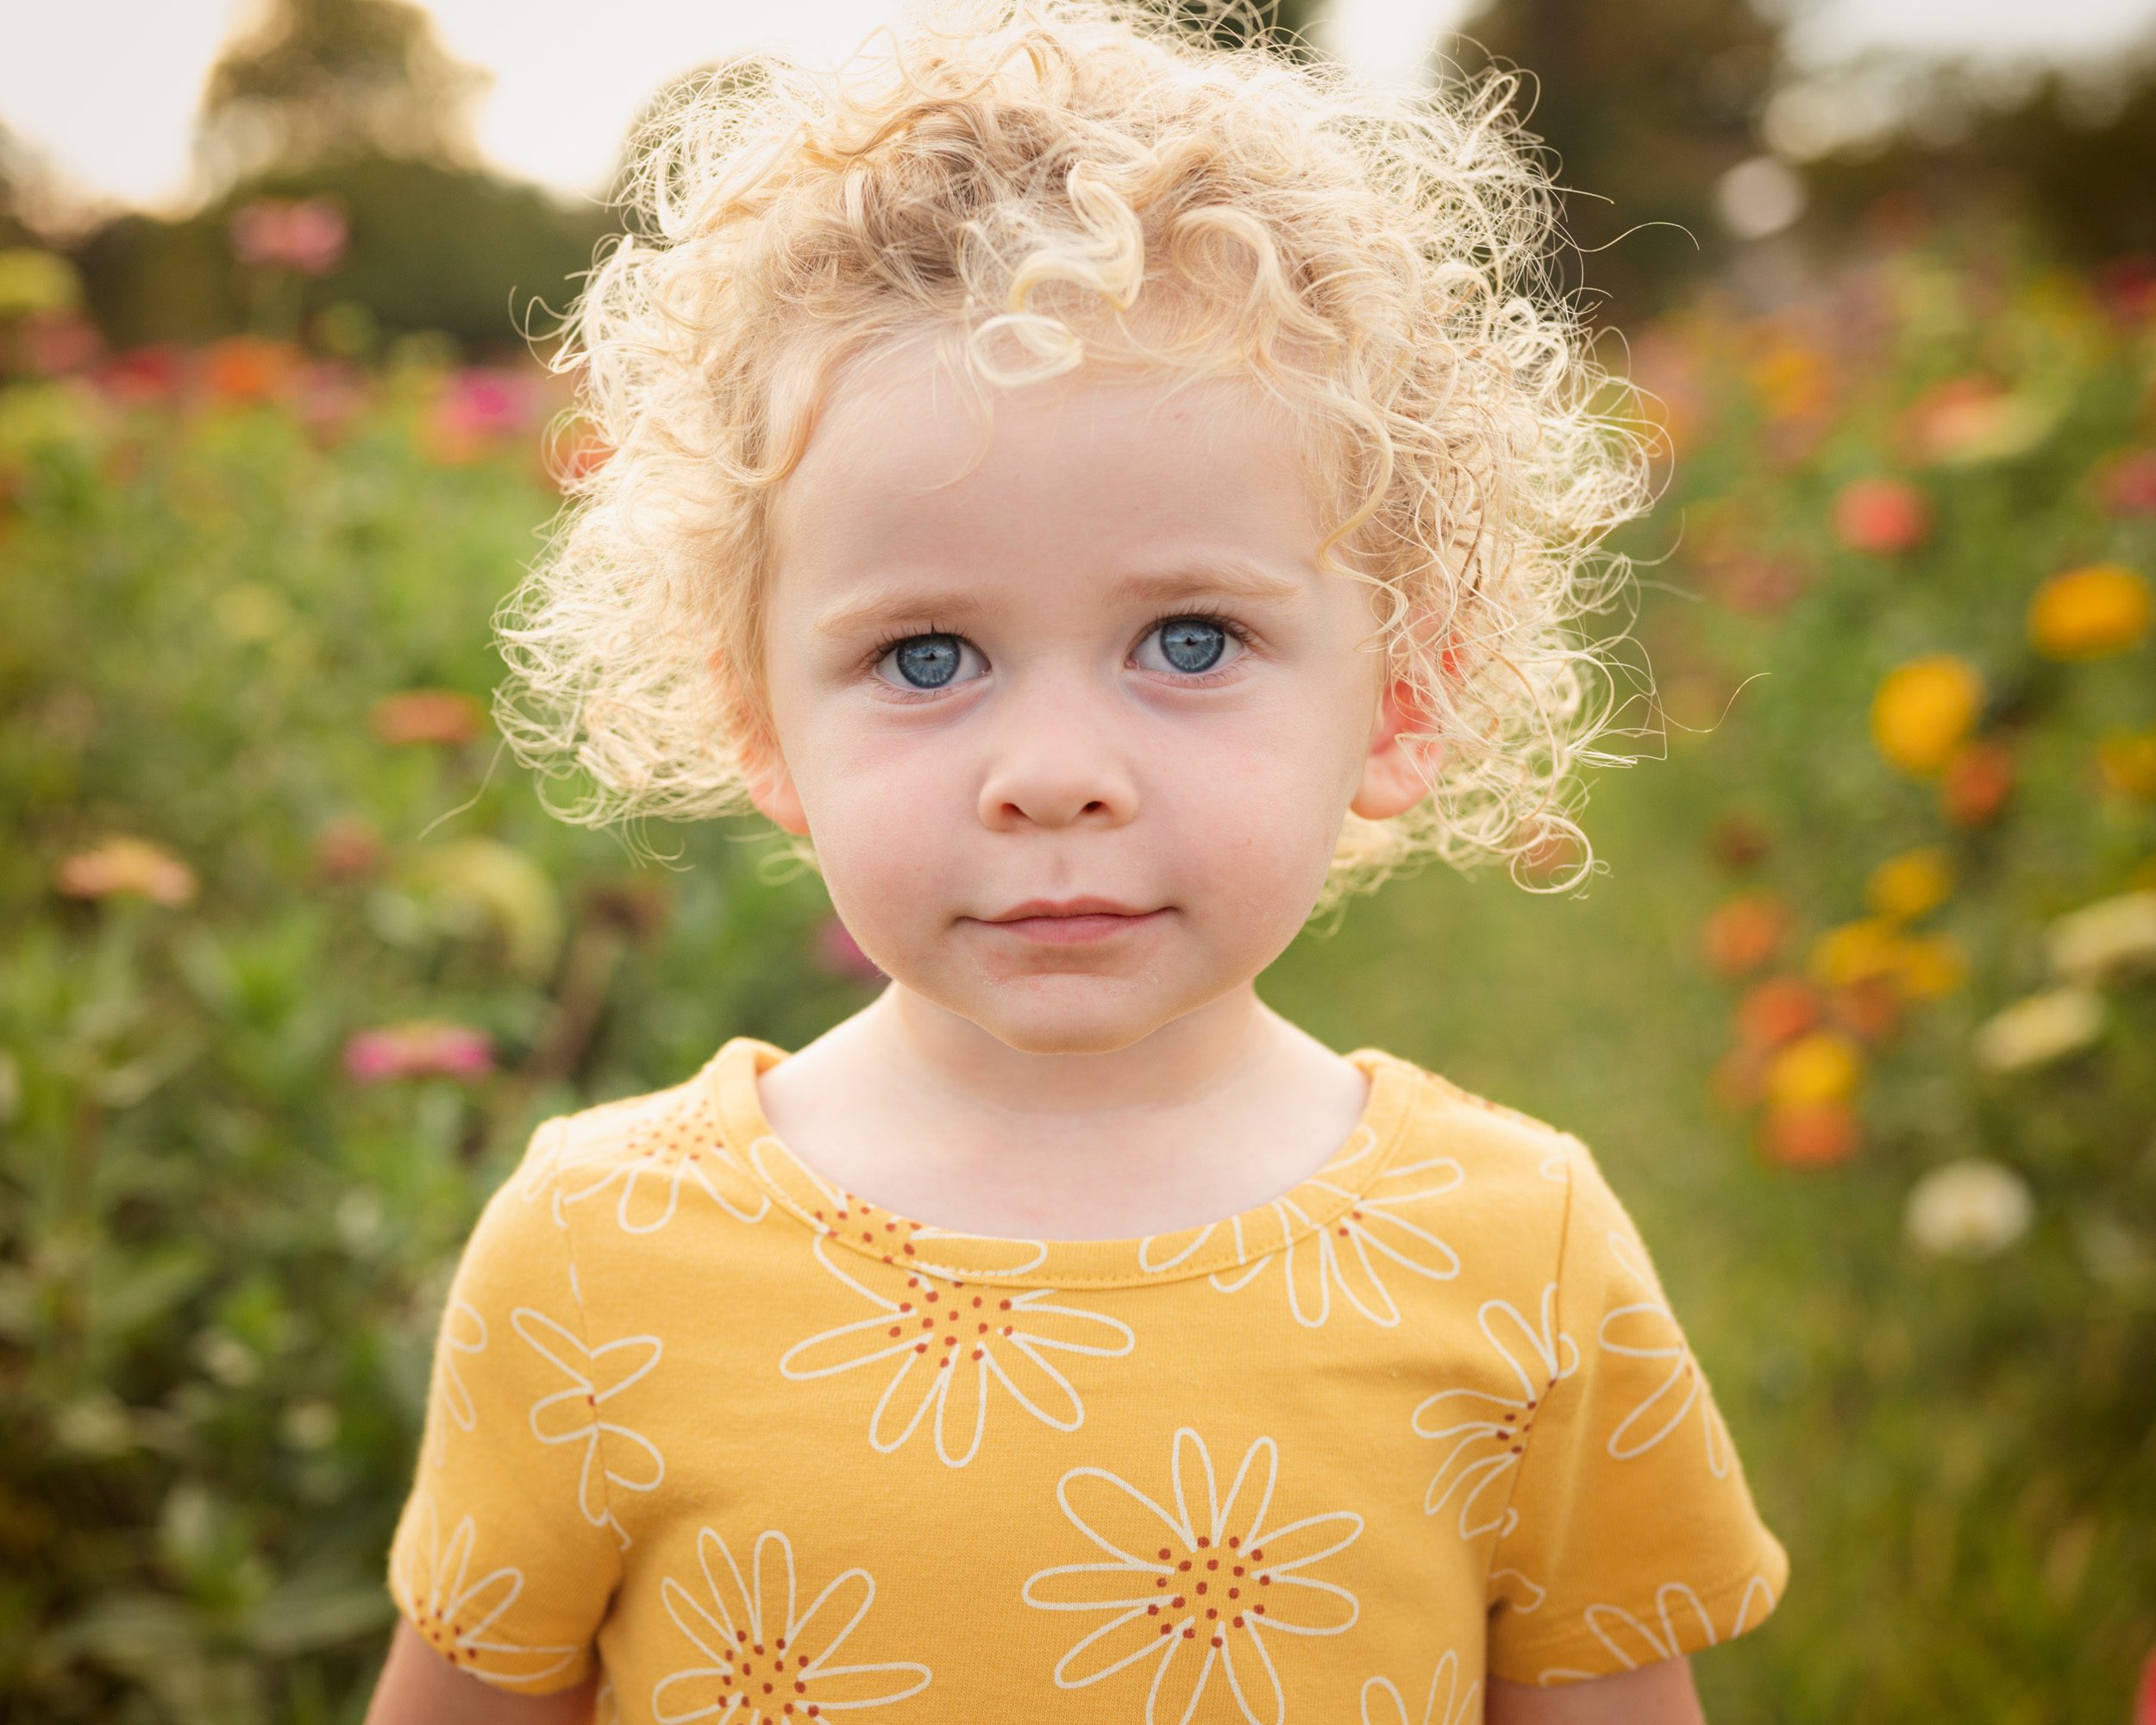 a close up picture of a little girl in a yellow dress standing in a field of colorful flowers and looking straight at the camera during a family photo session